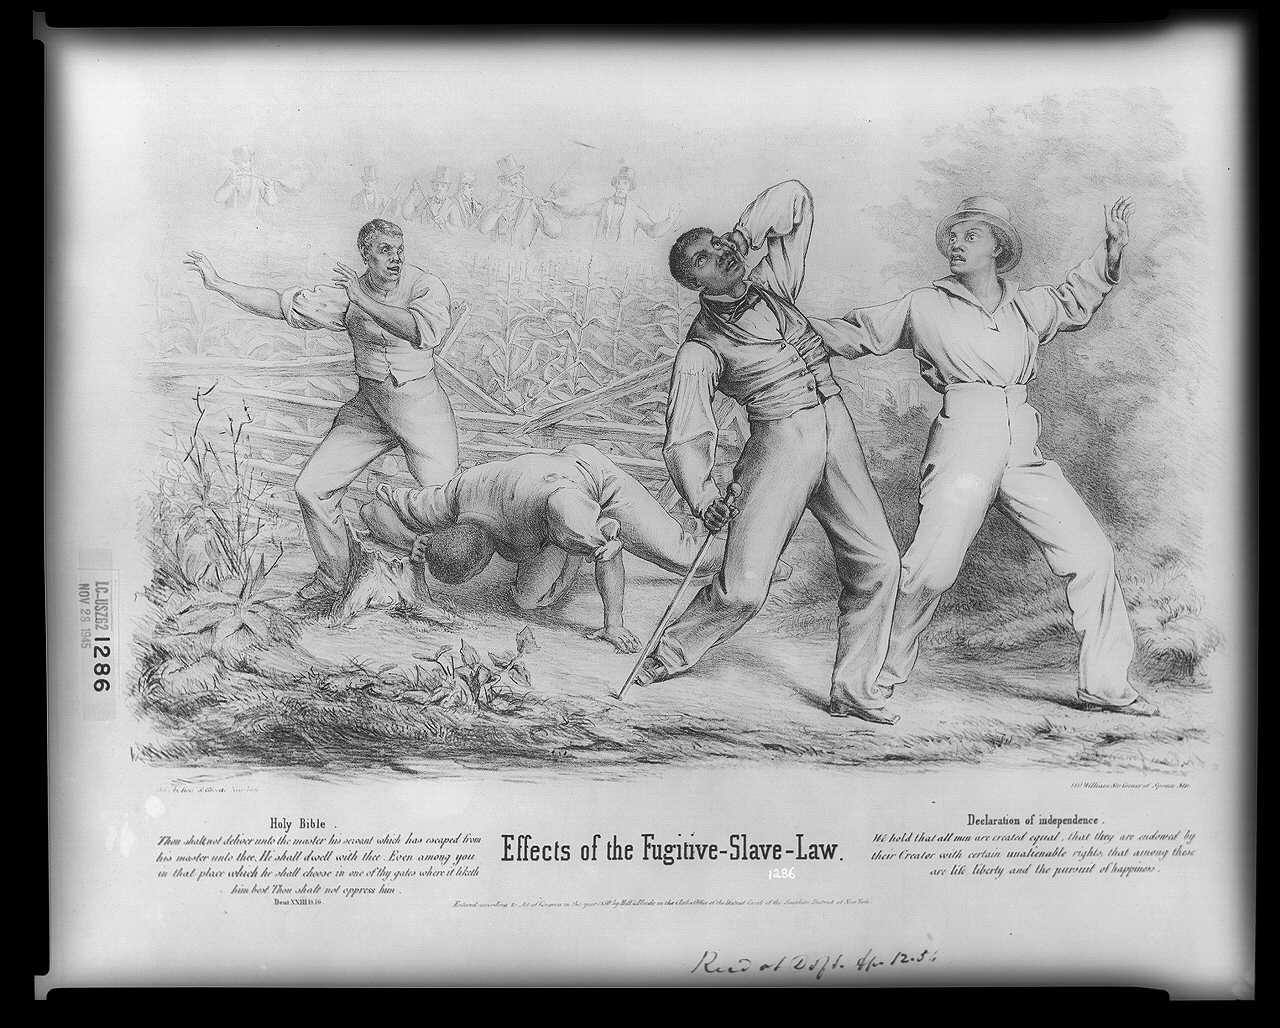 Political Cartoon. Four men who appear to be of African descent run through a field to get away from a mob of white men, who appear to be carrying and firing guns.